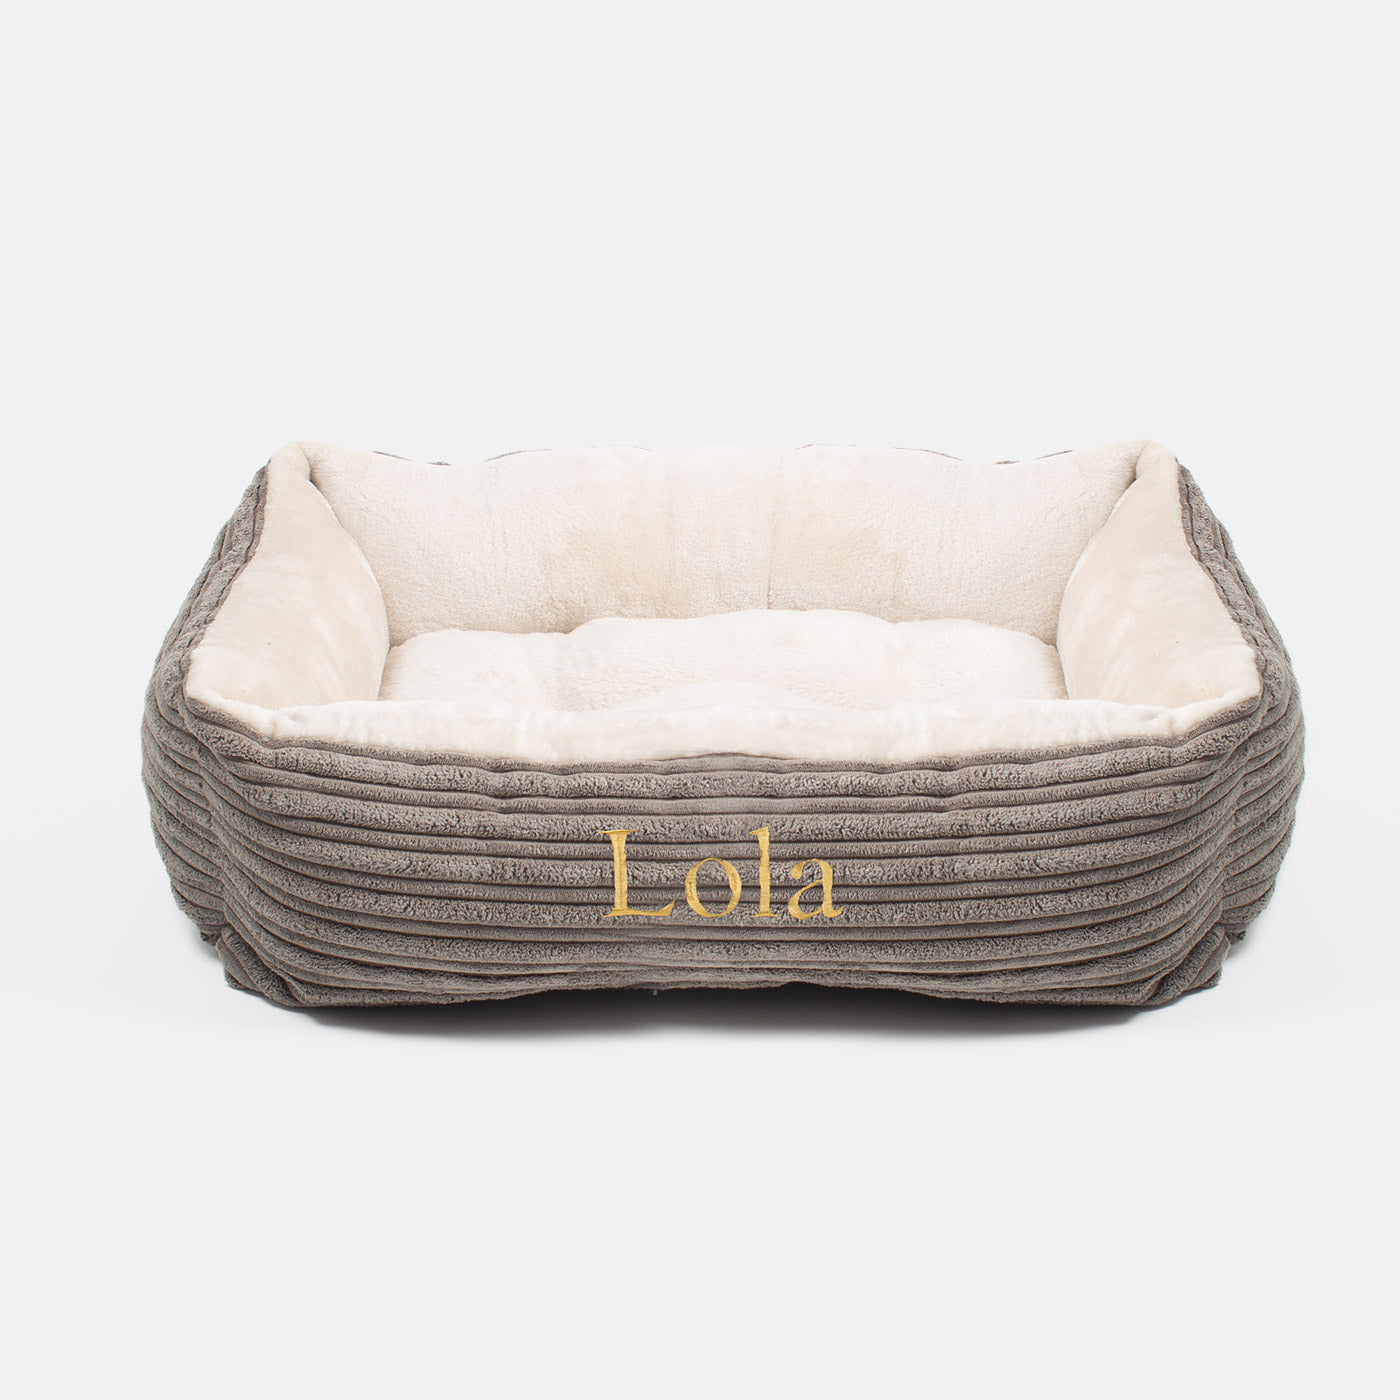 Cozy & Calm Puppy Cage Bed, The Perfect Dog Cage Accessory For The Ultimate Dog Den! In Stunning Dark Grey Essentials Plush! Available To Personalize at Lords & Labradors US